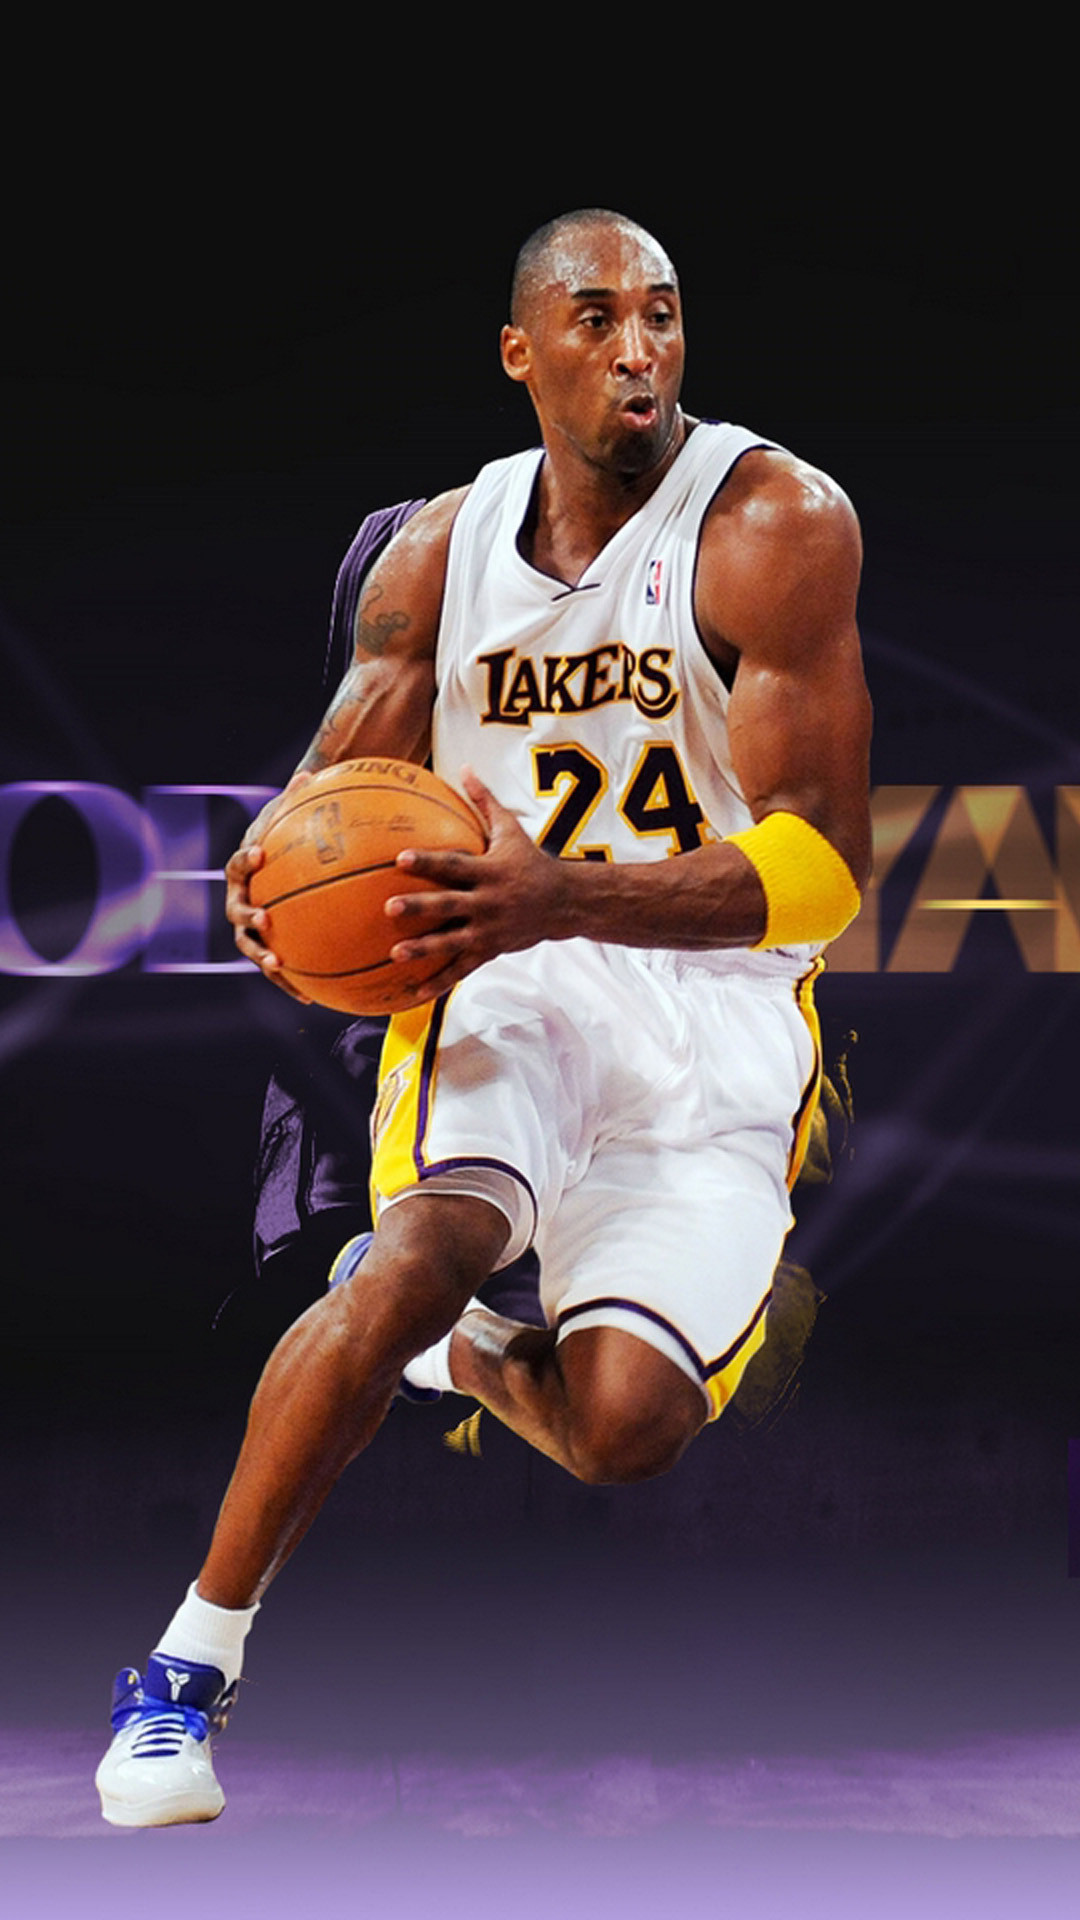 1080x1920 Kobe Bryant 02 Wallpapers for Samsung Galaxy S5